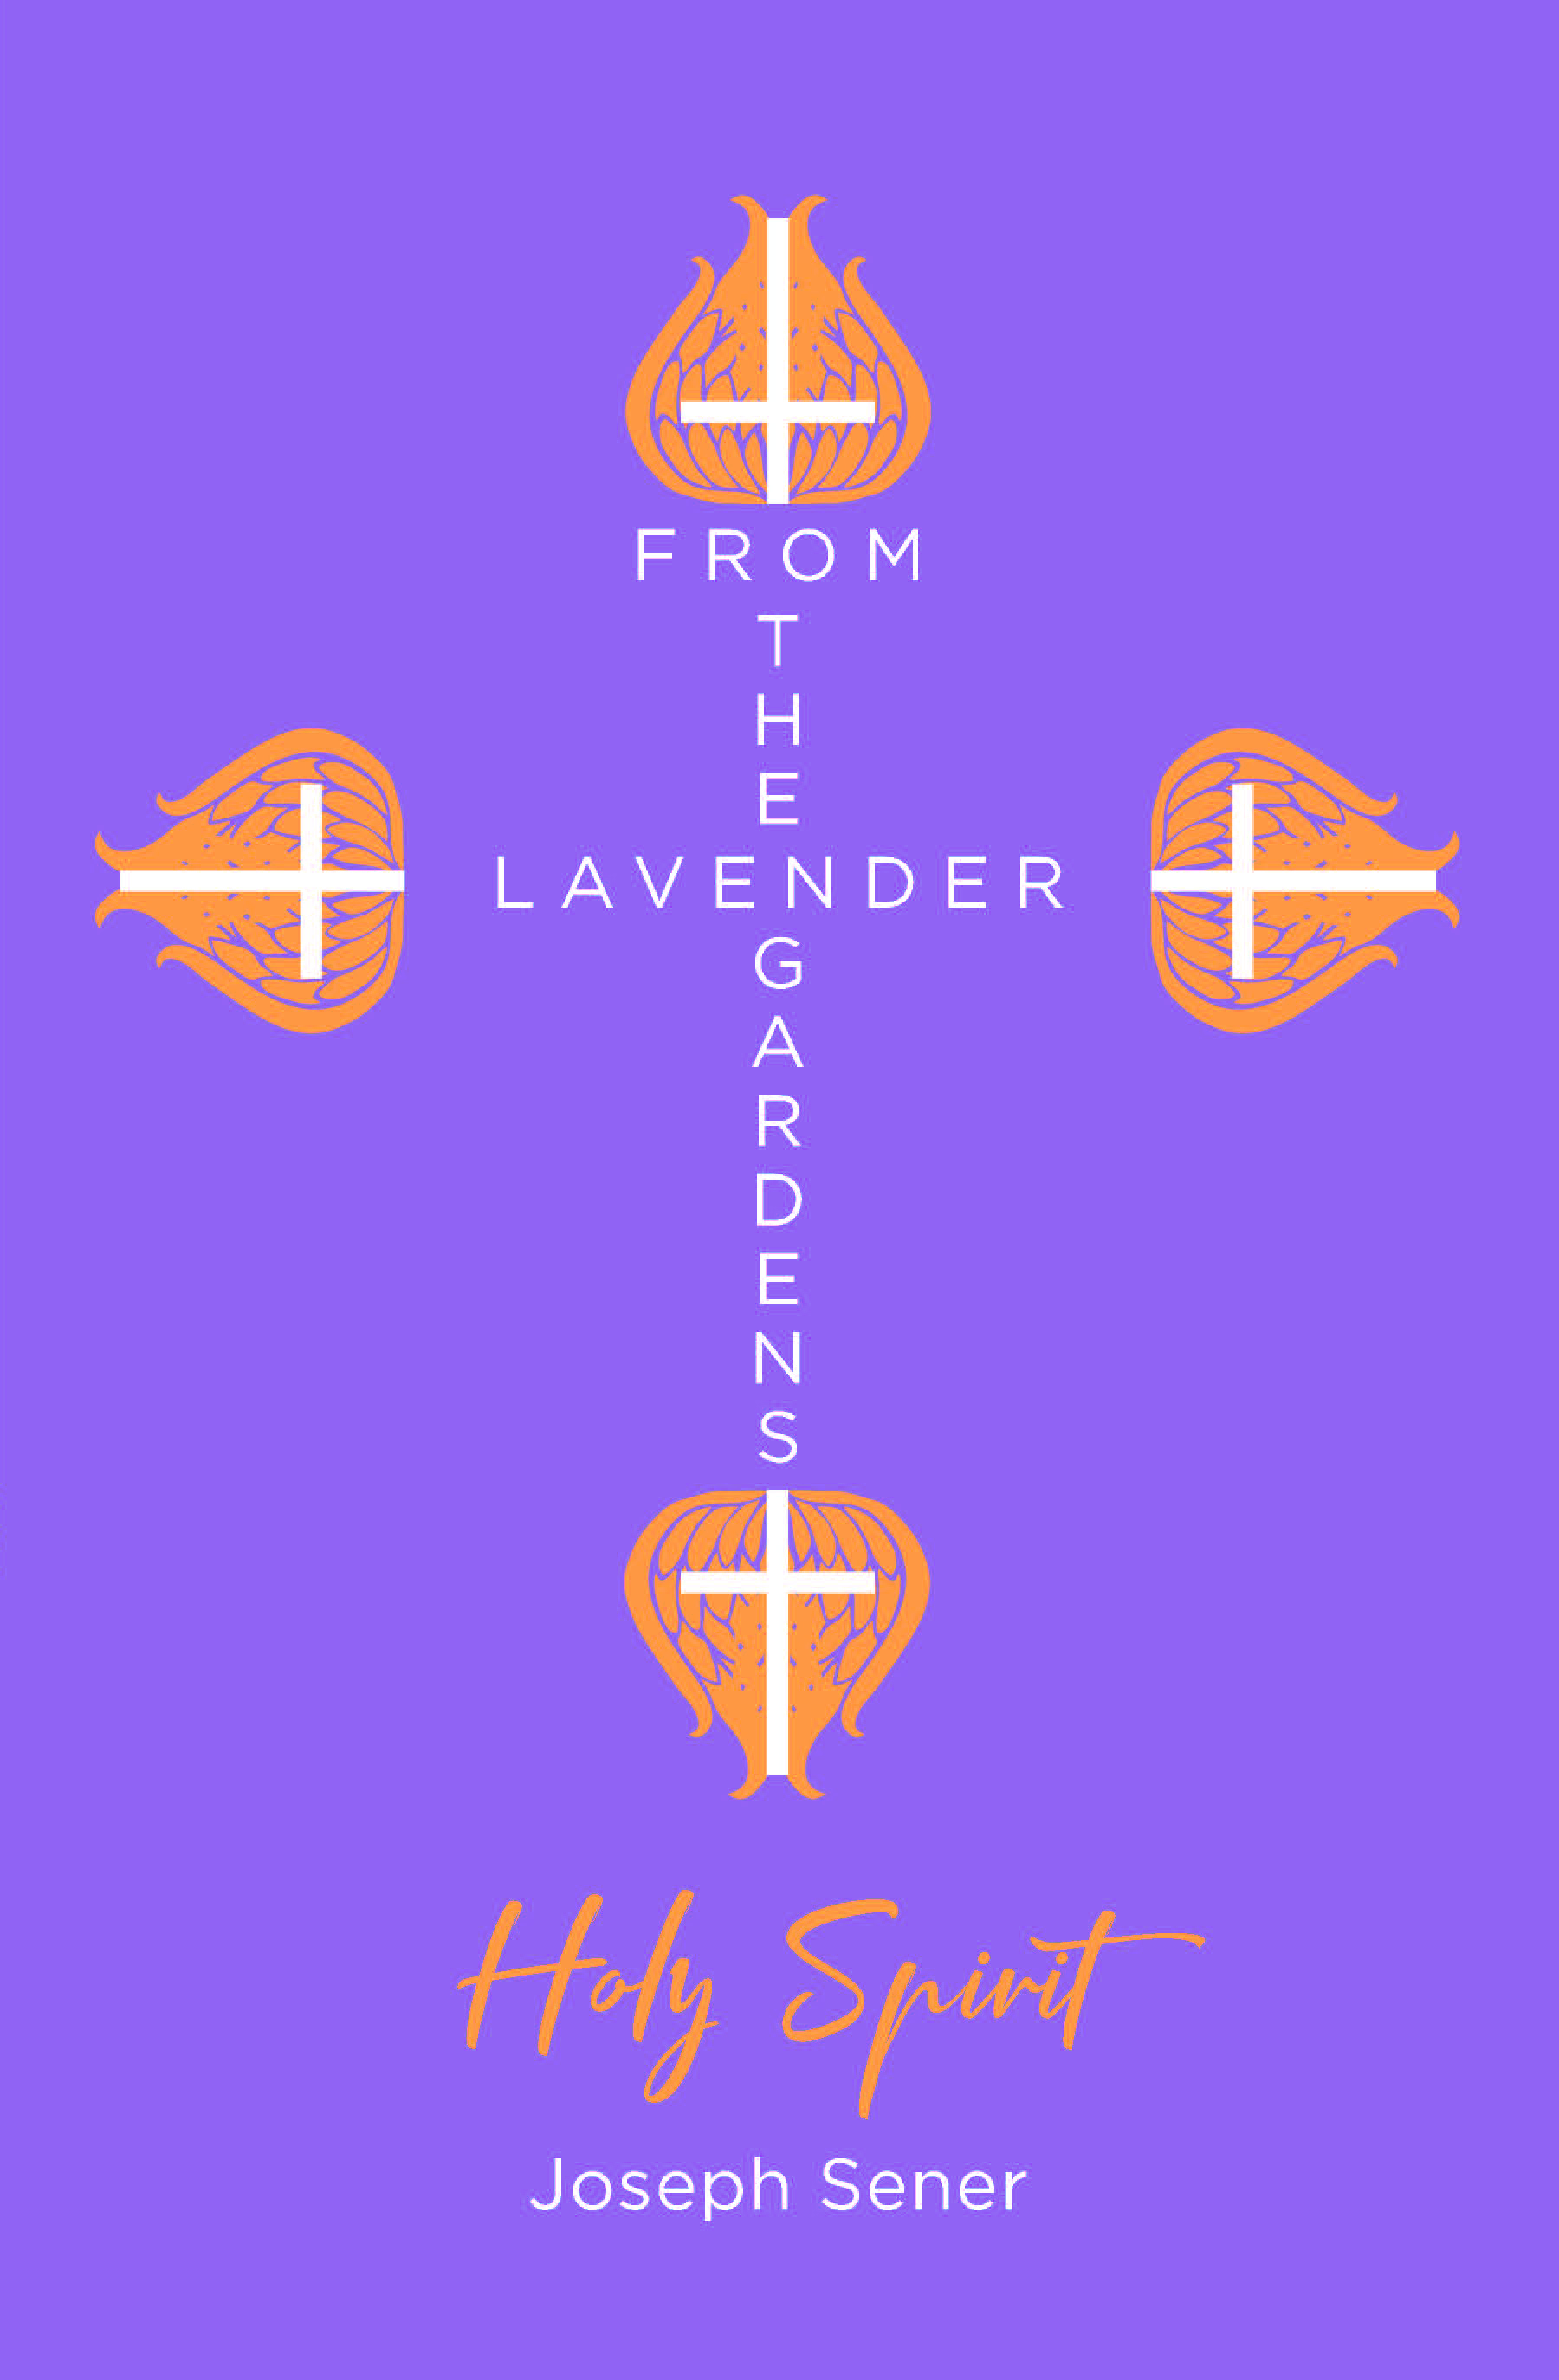 Author Joseph Sener’s New Book, "From the Lavender Gardens: Holy Spirit," is a Spiritual Look at the Healing and Preparing for the End Times